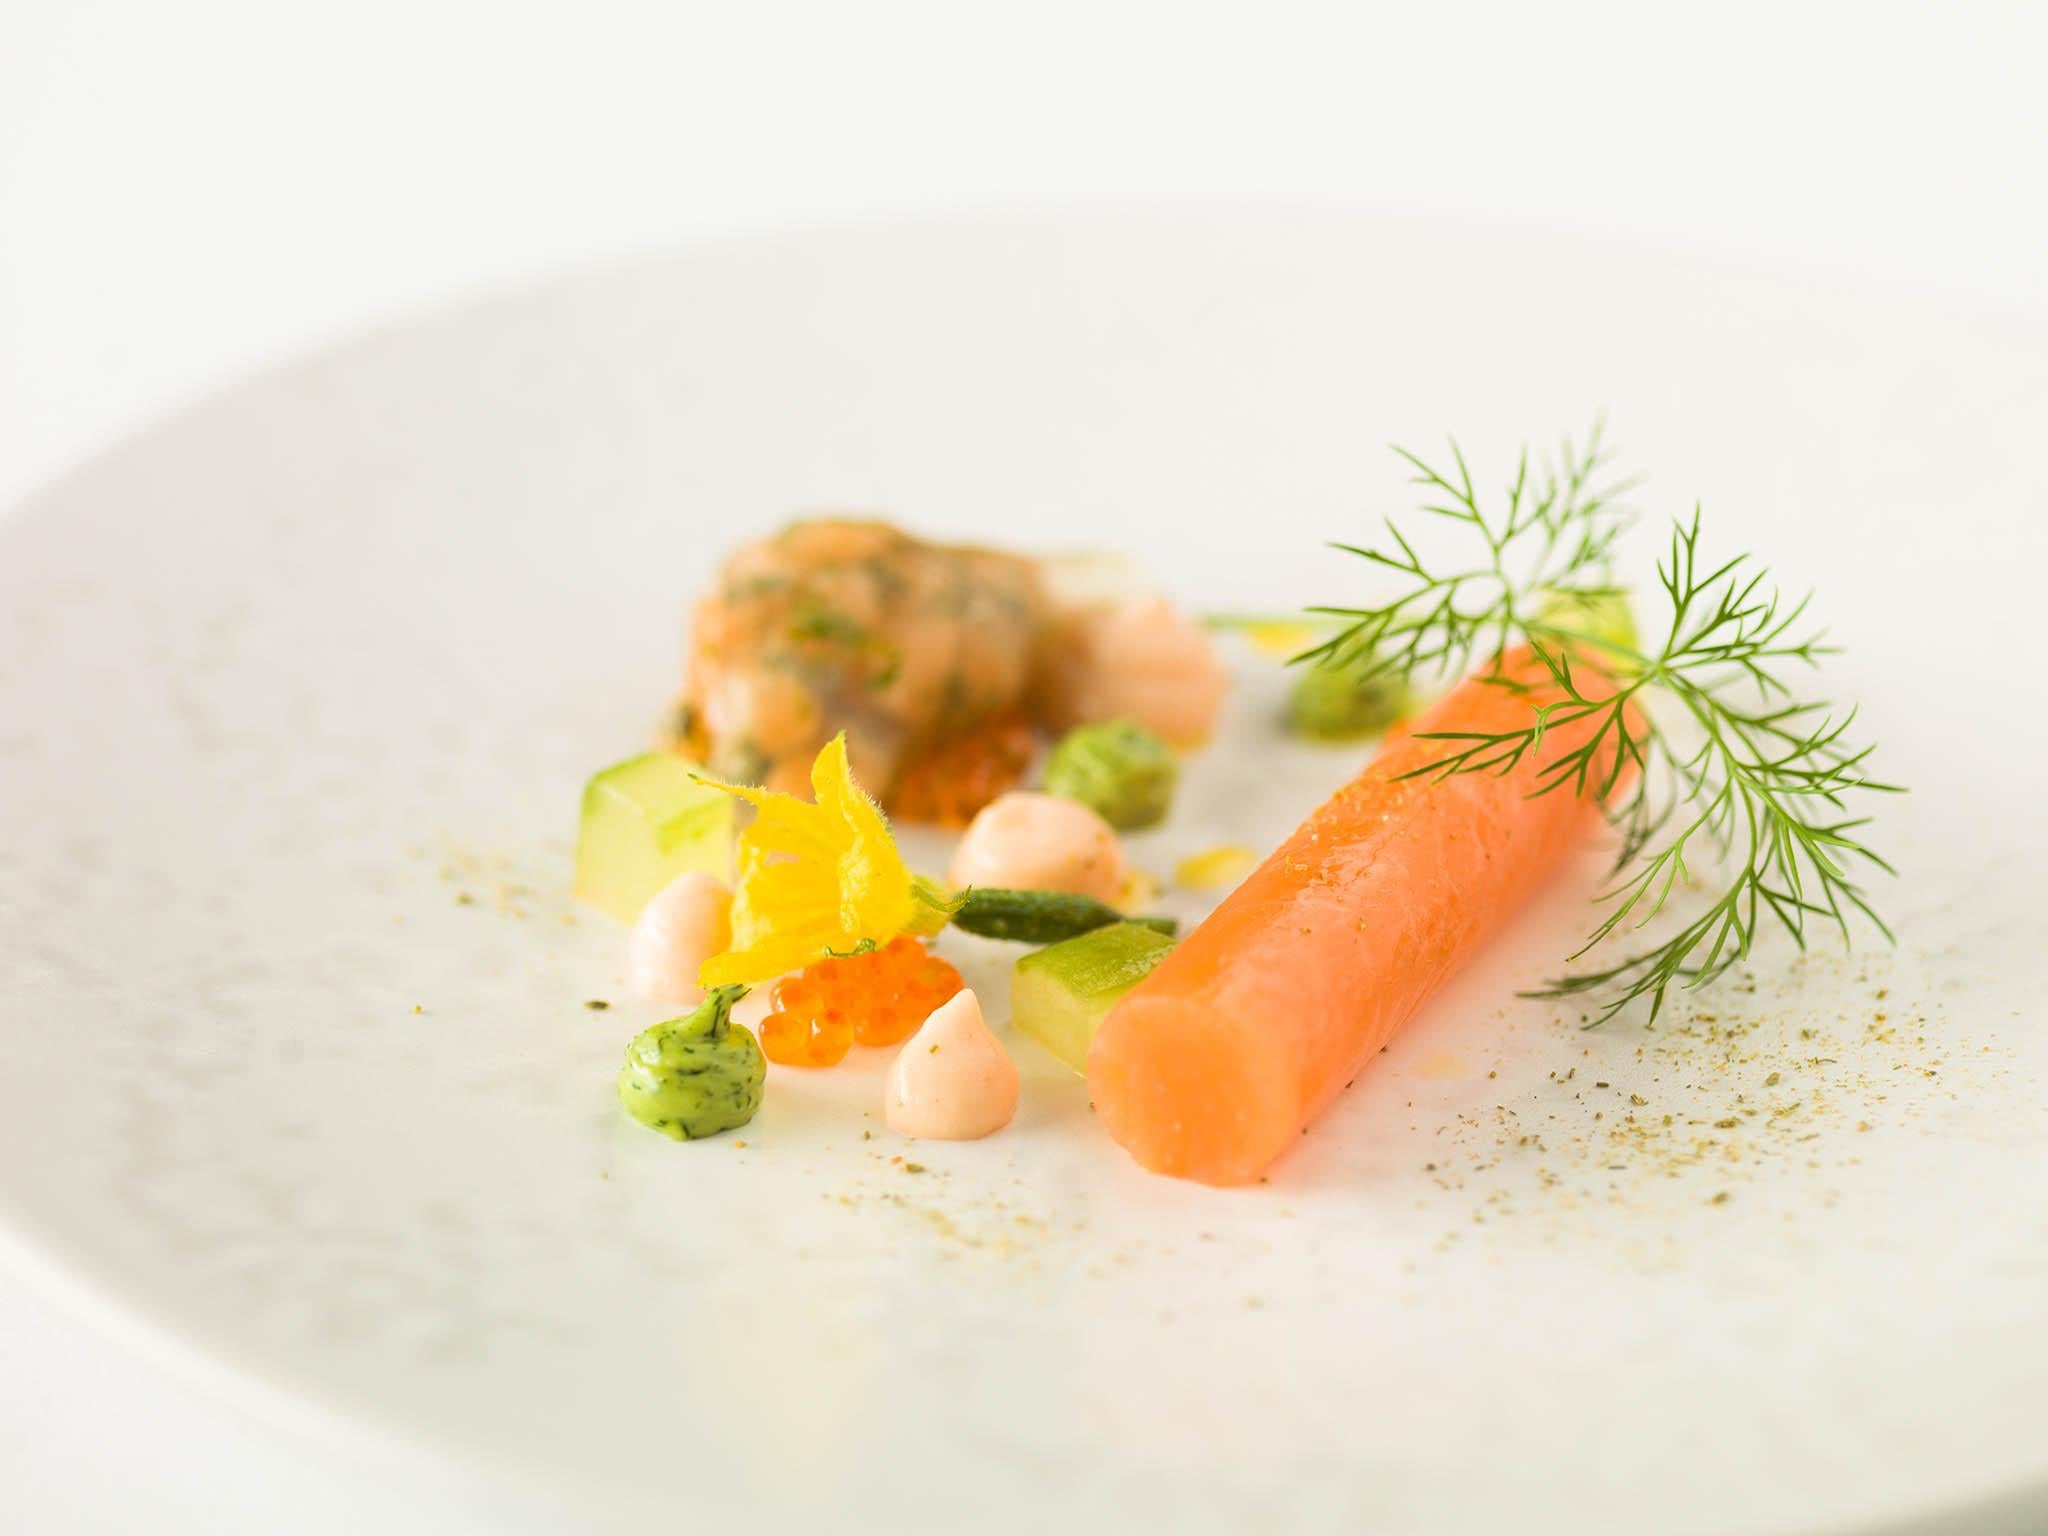 Sea trout is the standout from the seven-course tasting menu at Rockliffe